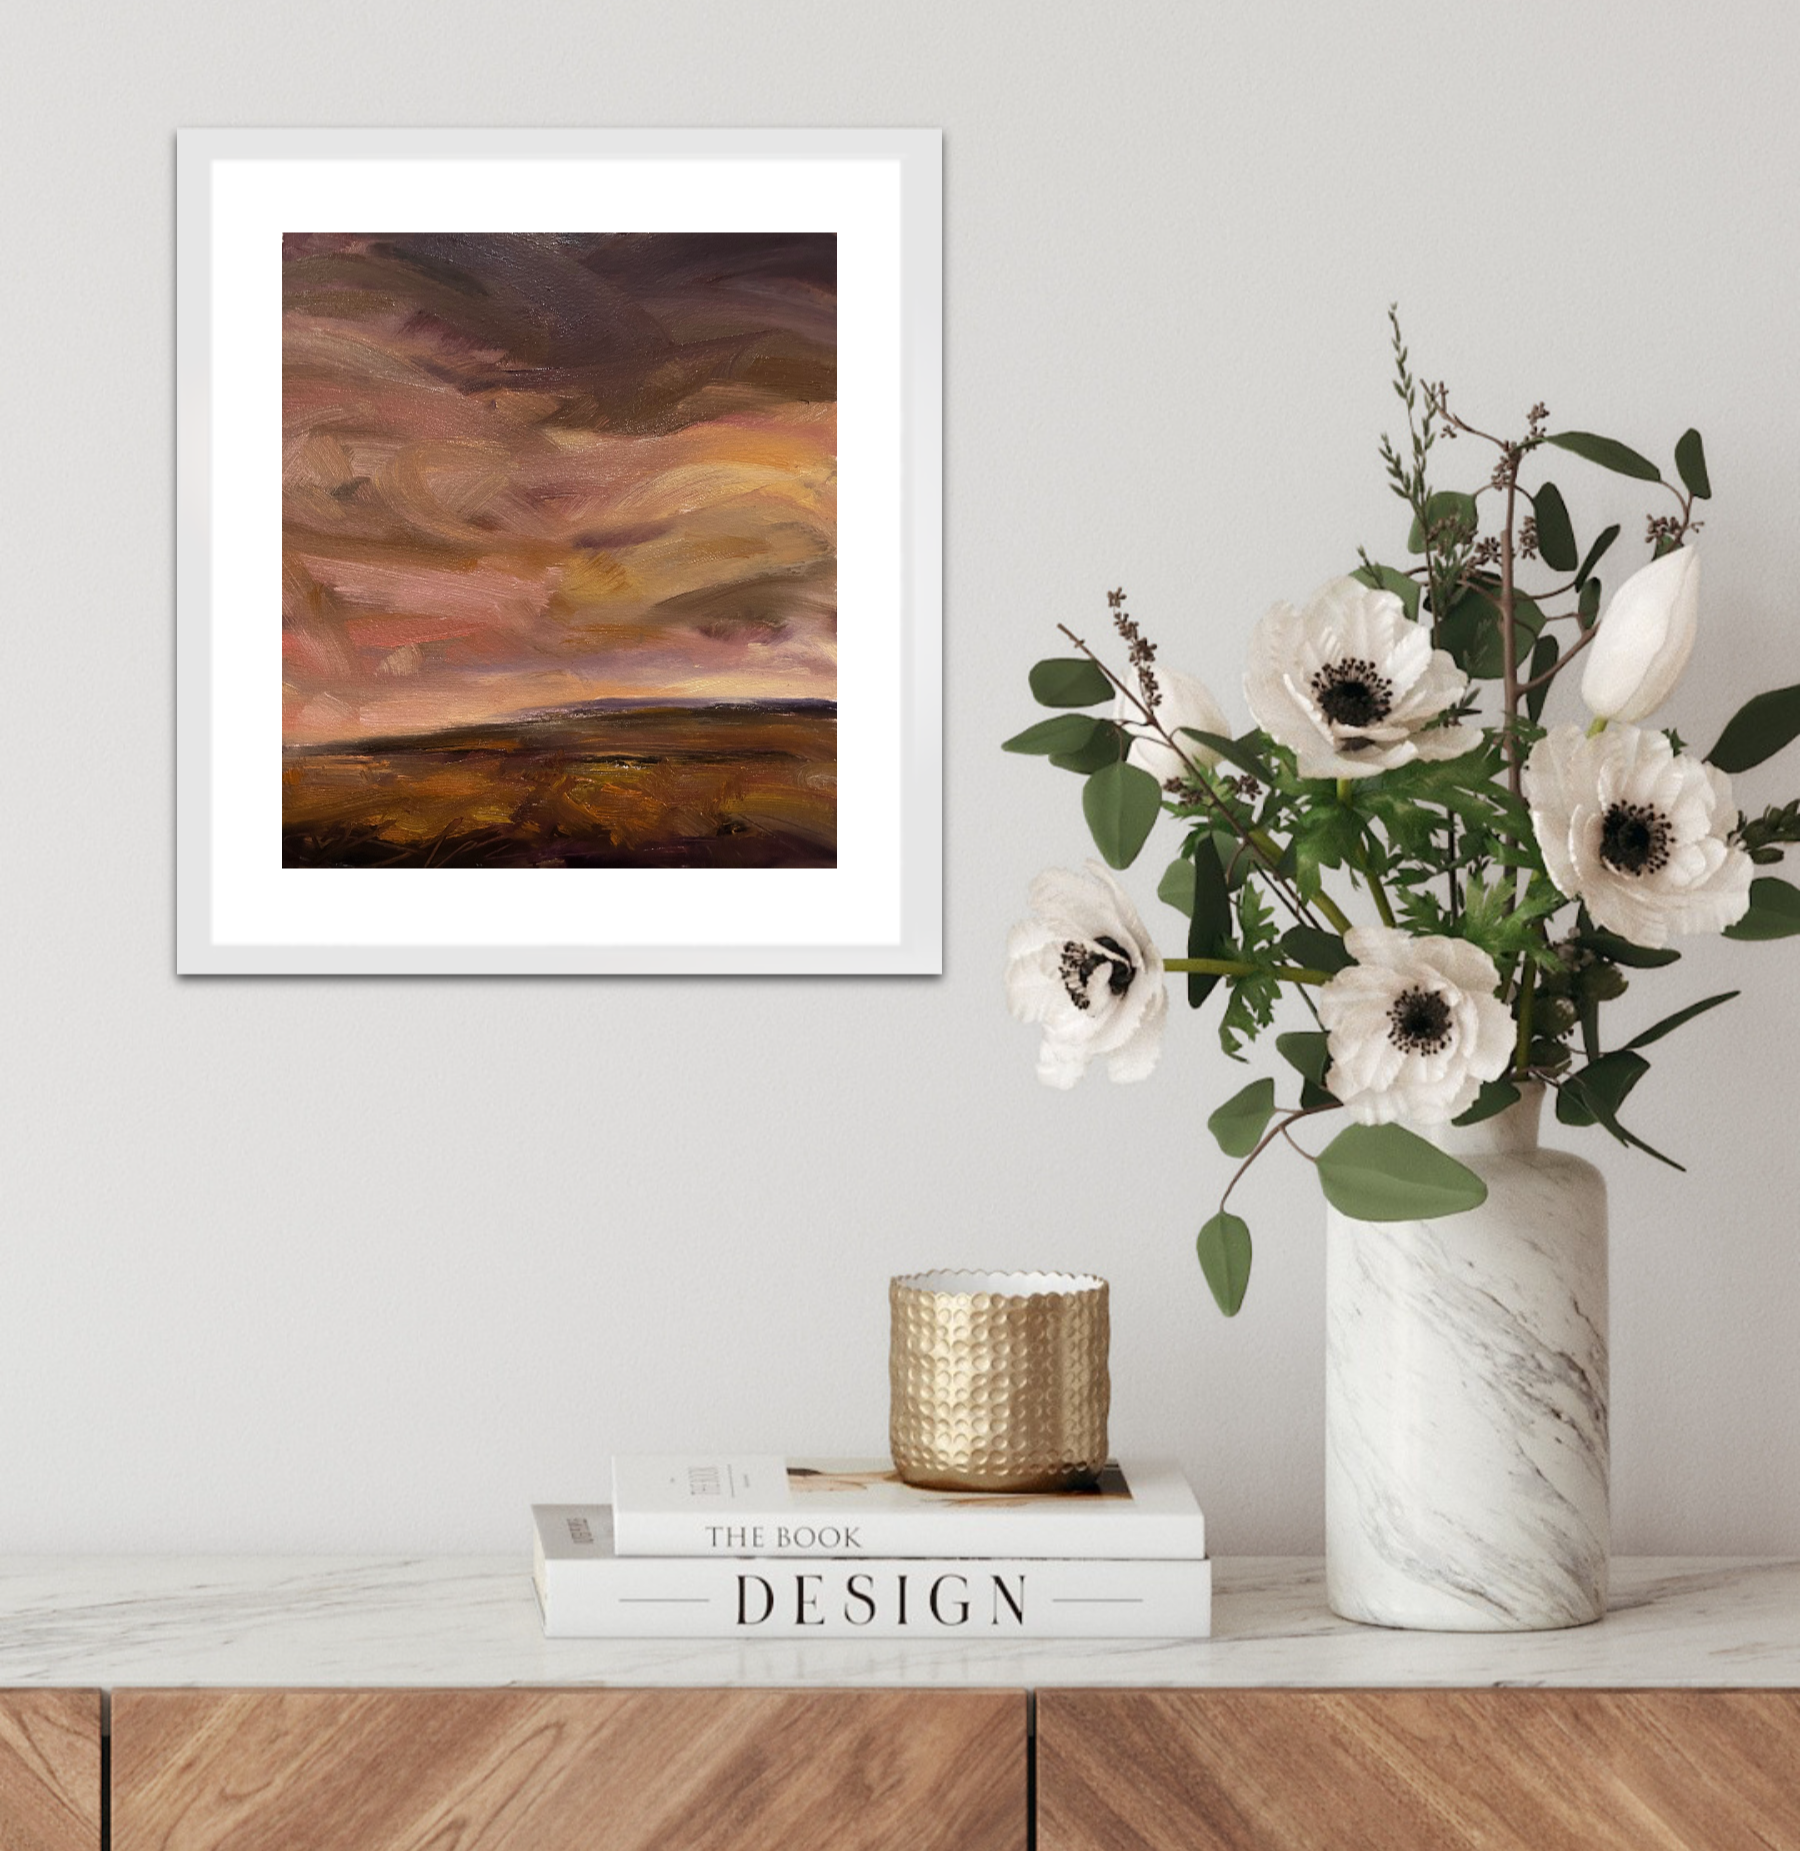 My Soul's Home Original Oil On Paper Landscape Painting In Room Setting 1